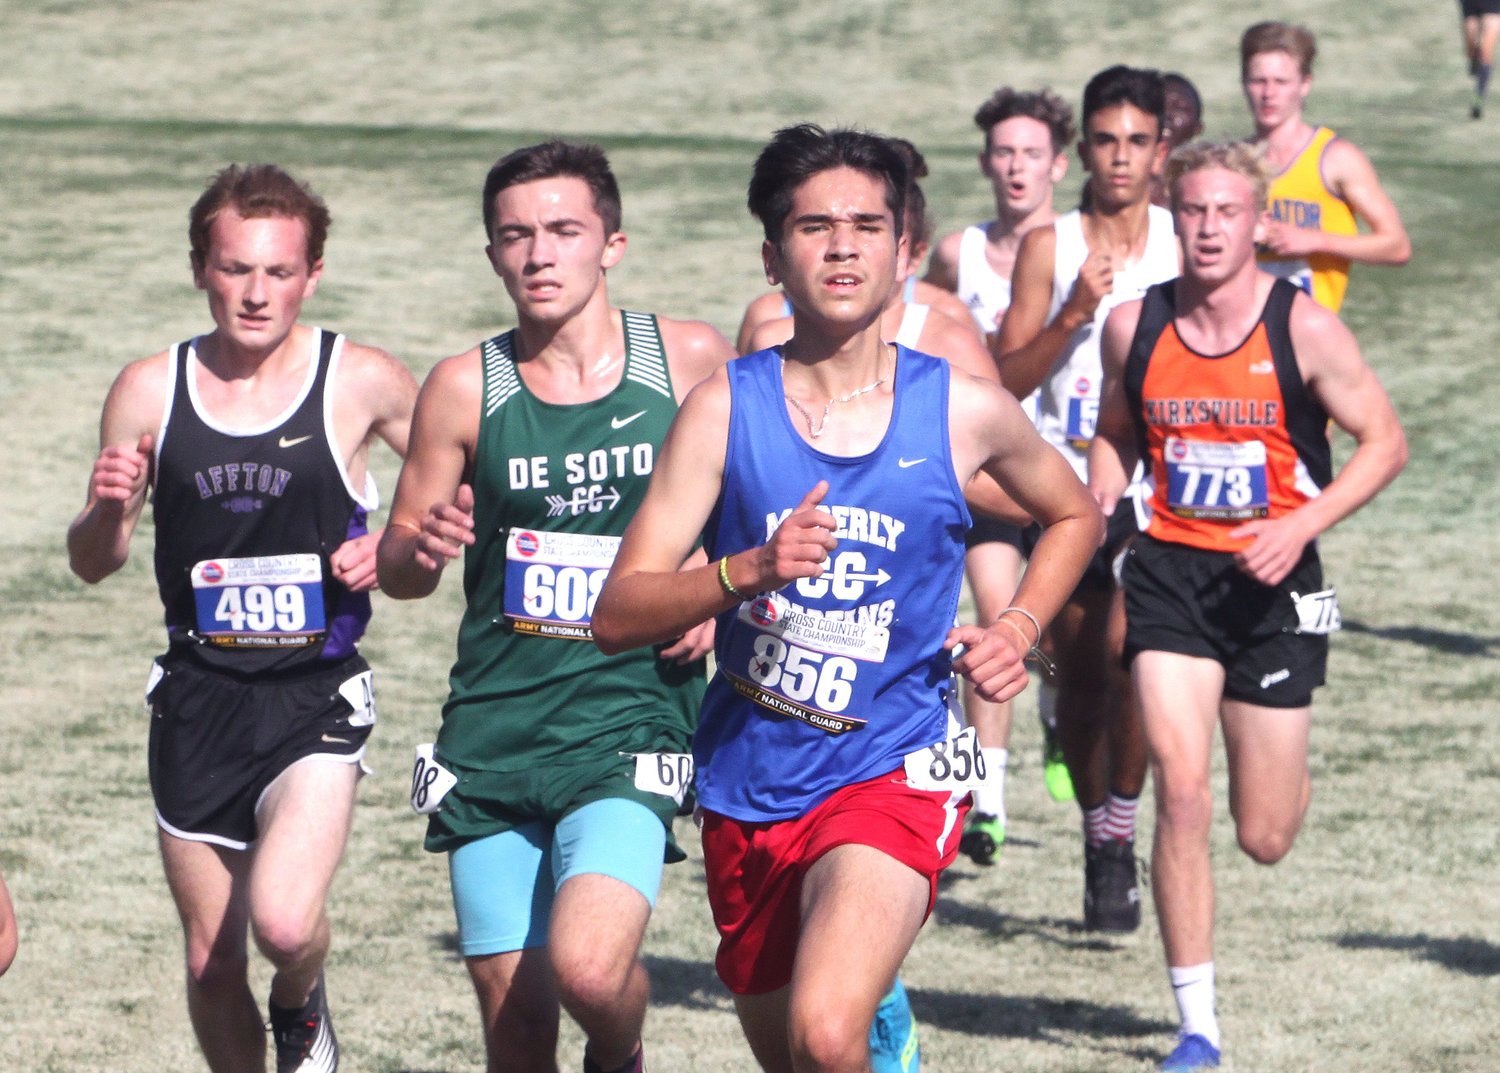 Moberly Spartan senior cross country runner Antonio Rivera (#856)  made his first appearance at the state championships Friday morning to finish 4th among 167 qualifiers in the Class 4 meet held in Columbia. Rivera's time was 17:09.4.